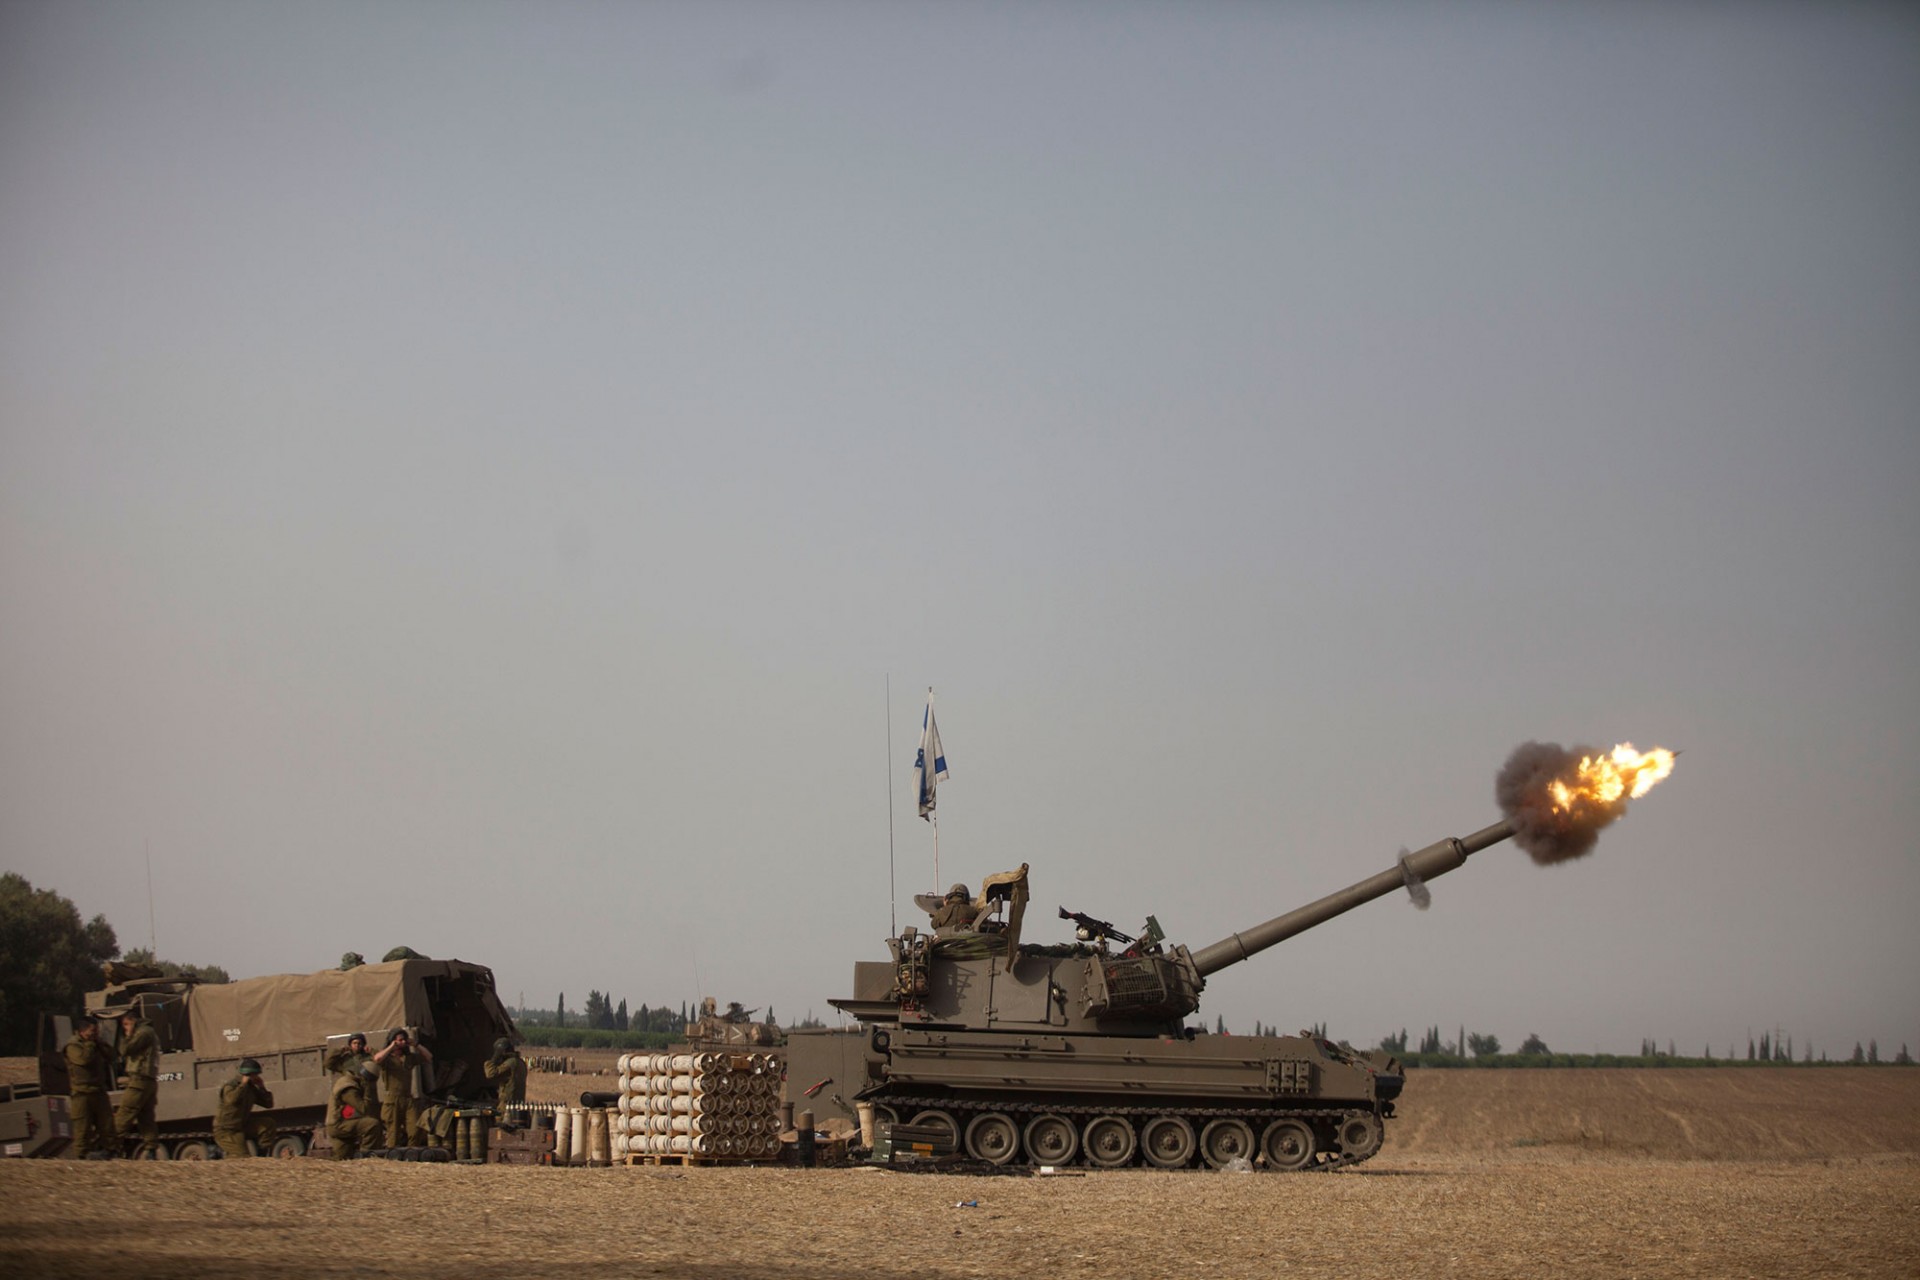 An Israeli artillery cannon fires a shell on July 12, 2014 on Israel's border with the Gaza Strip.